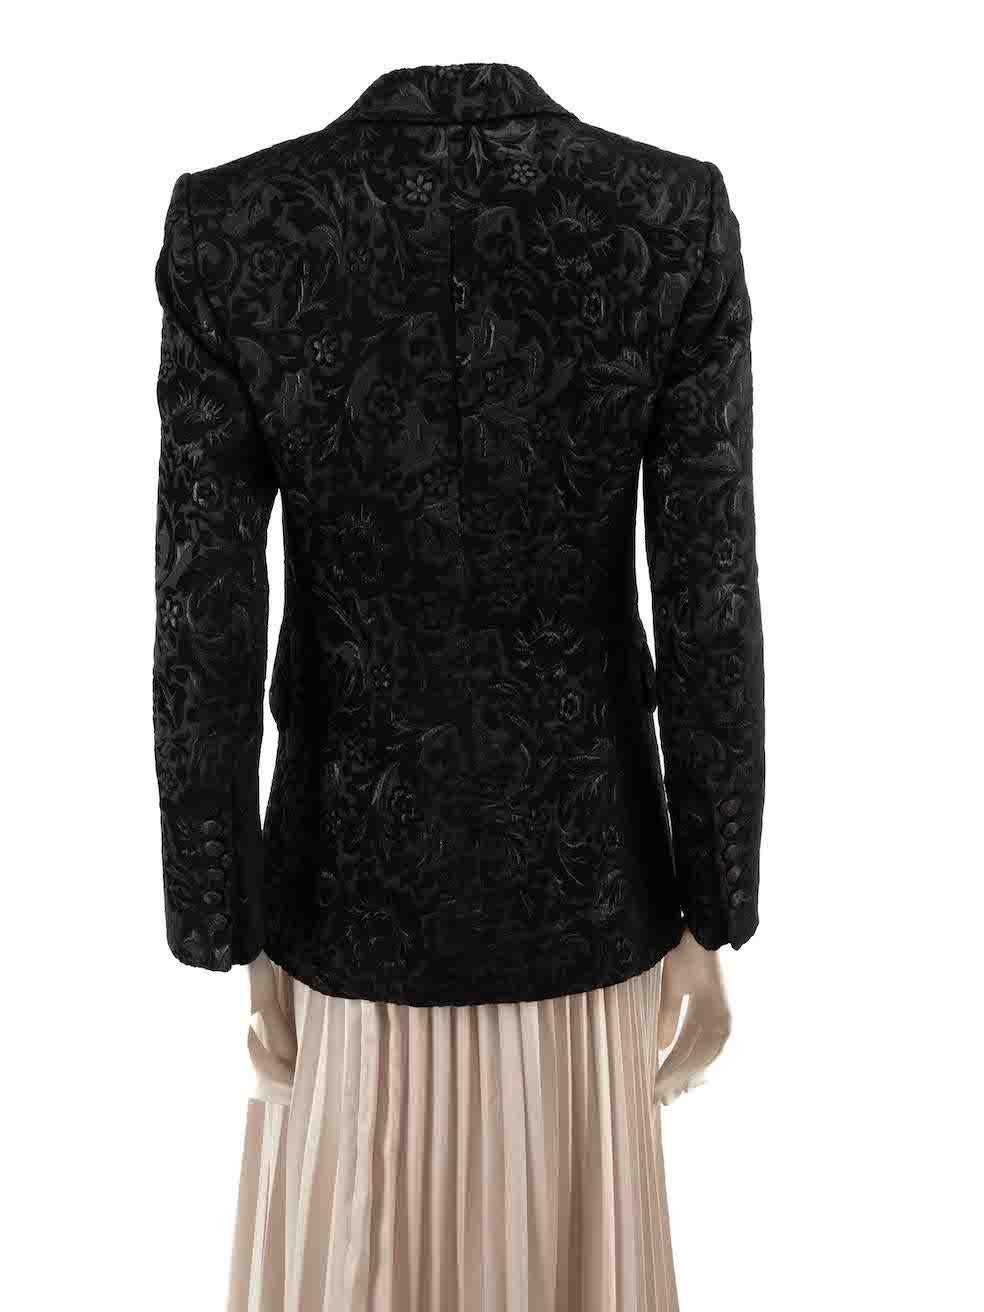 Gucci Black Floral Jacquard Blazer Jacket Size S In Good Condition For Sale In London, GB